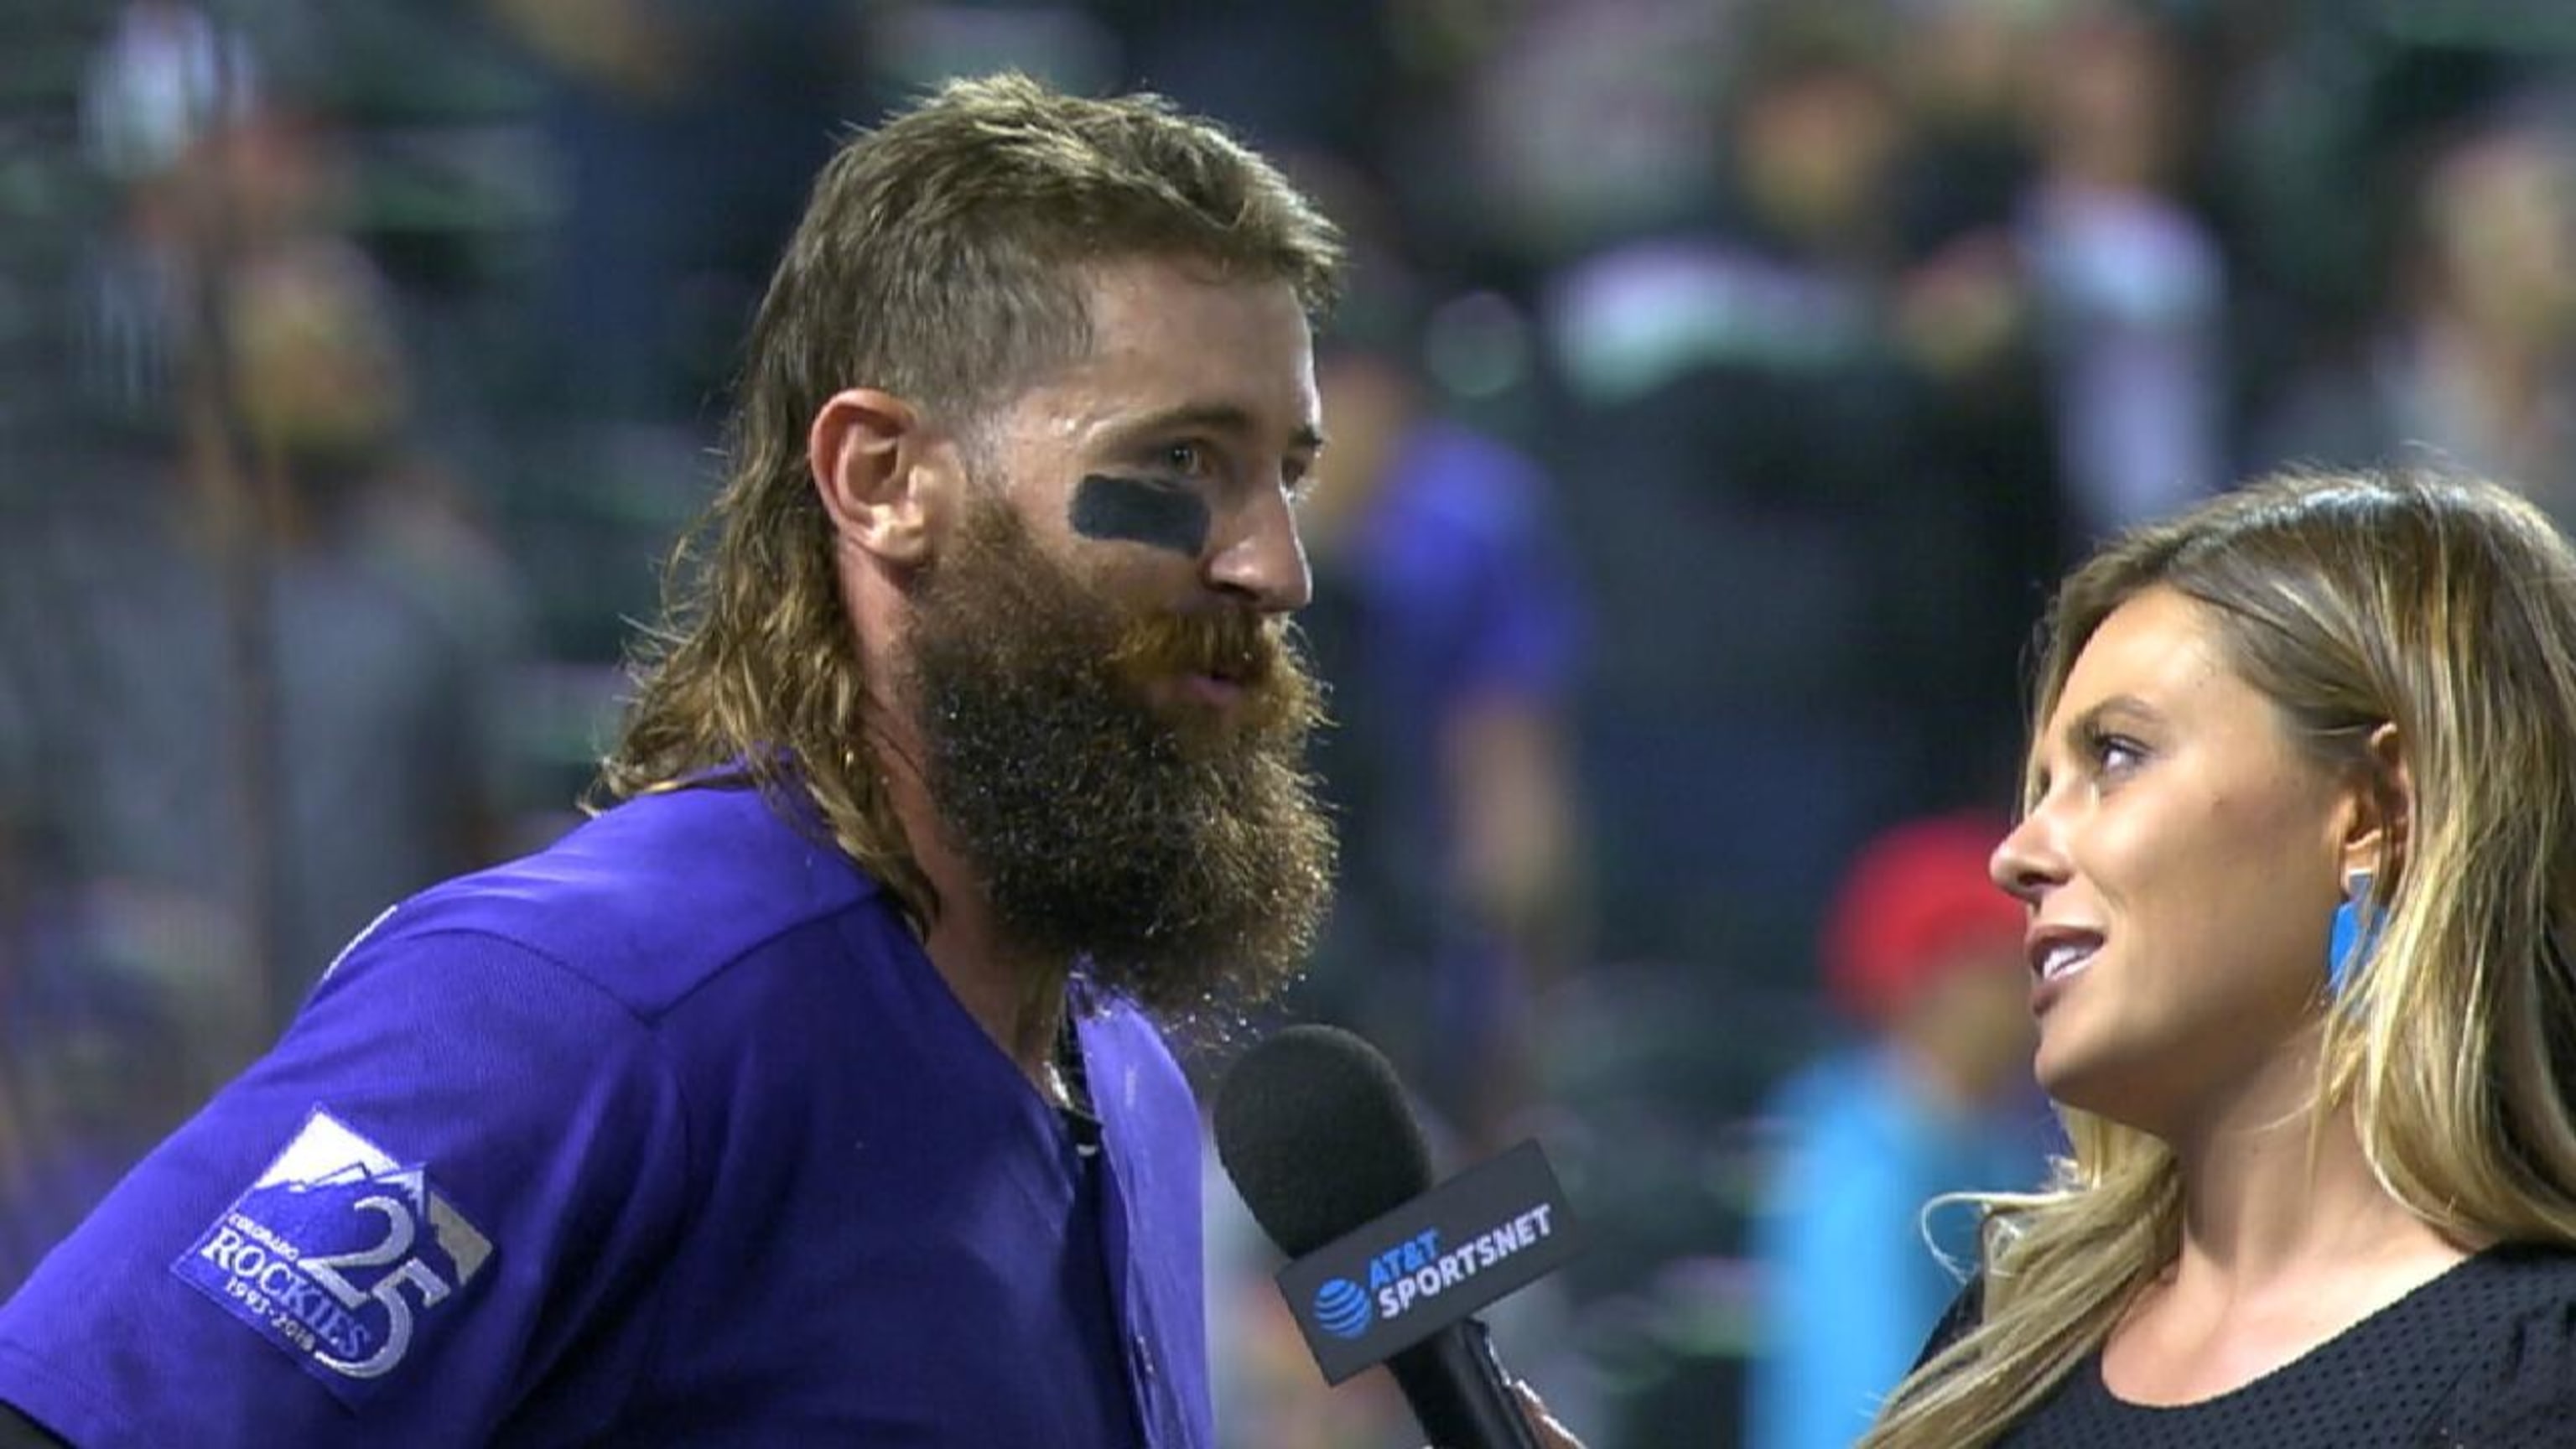 The Beard Alone Should Make Charlie Blackmon the Face of the